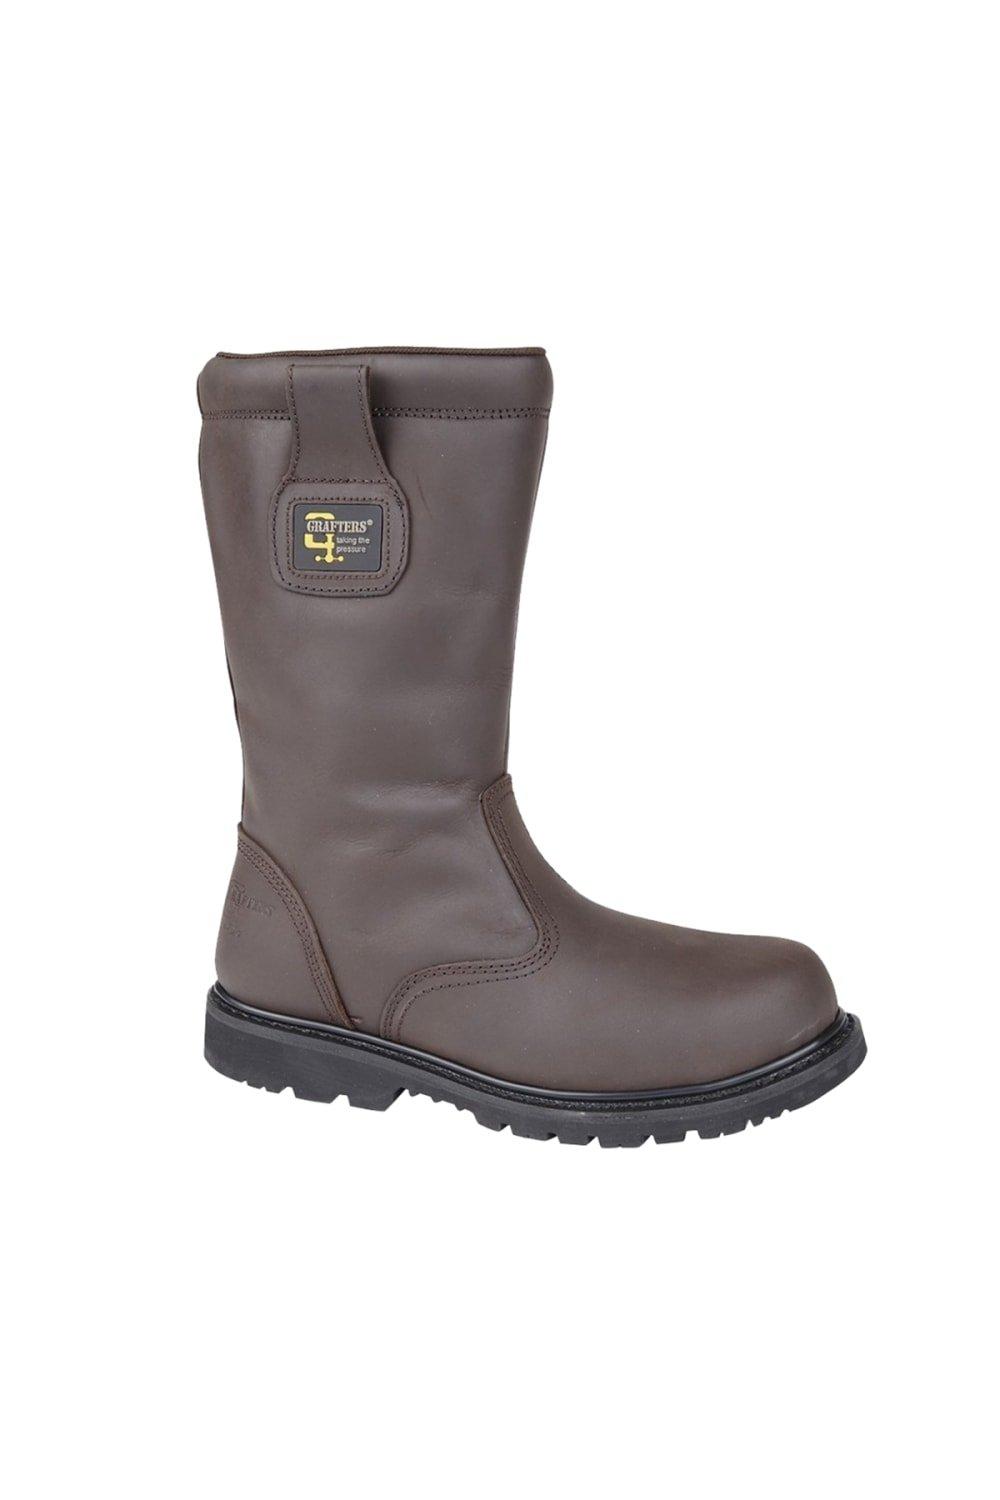 Safety Toe Cap Rigger Boots